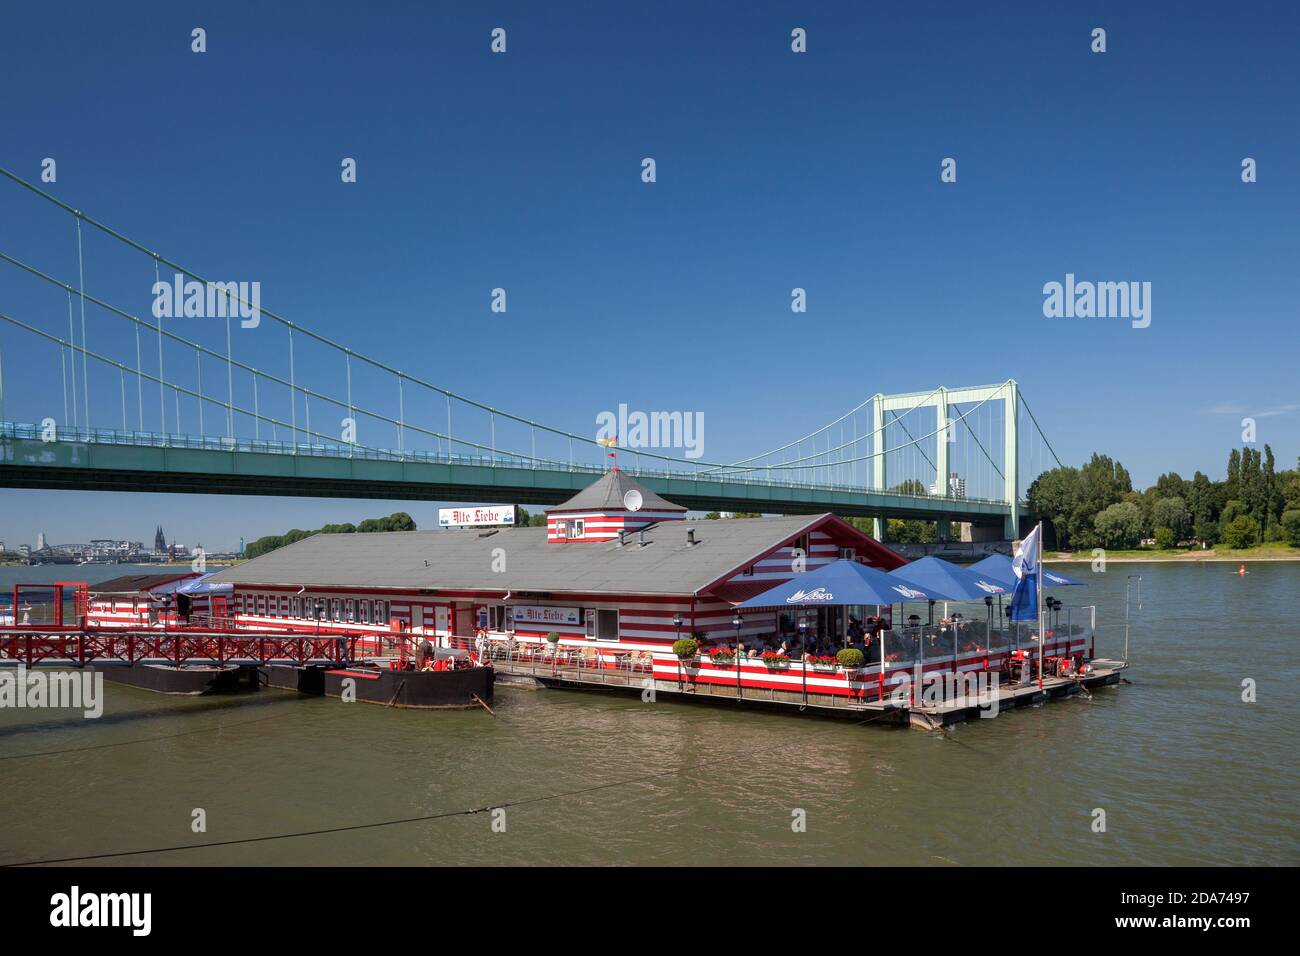 geography / travel, Germany, North Rhine-Westphalia, Cologne, boat house 'Alte Liebe' at Rhine riverba, Additional-Rights-Clearance-Info-Not-Available Stock Photo